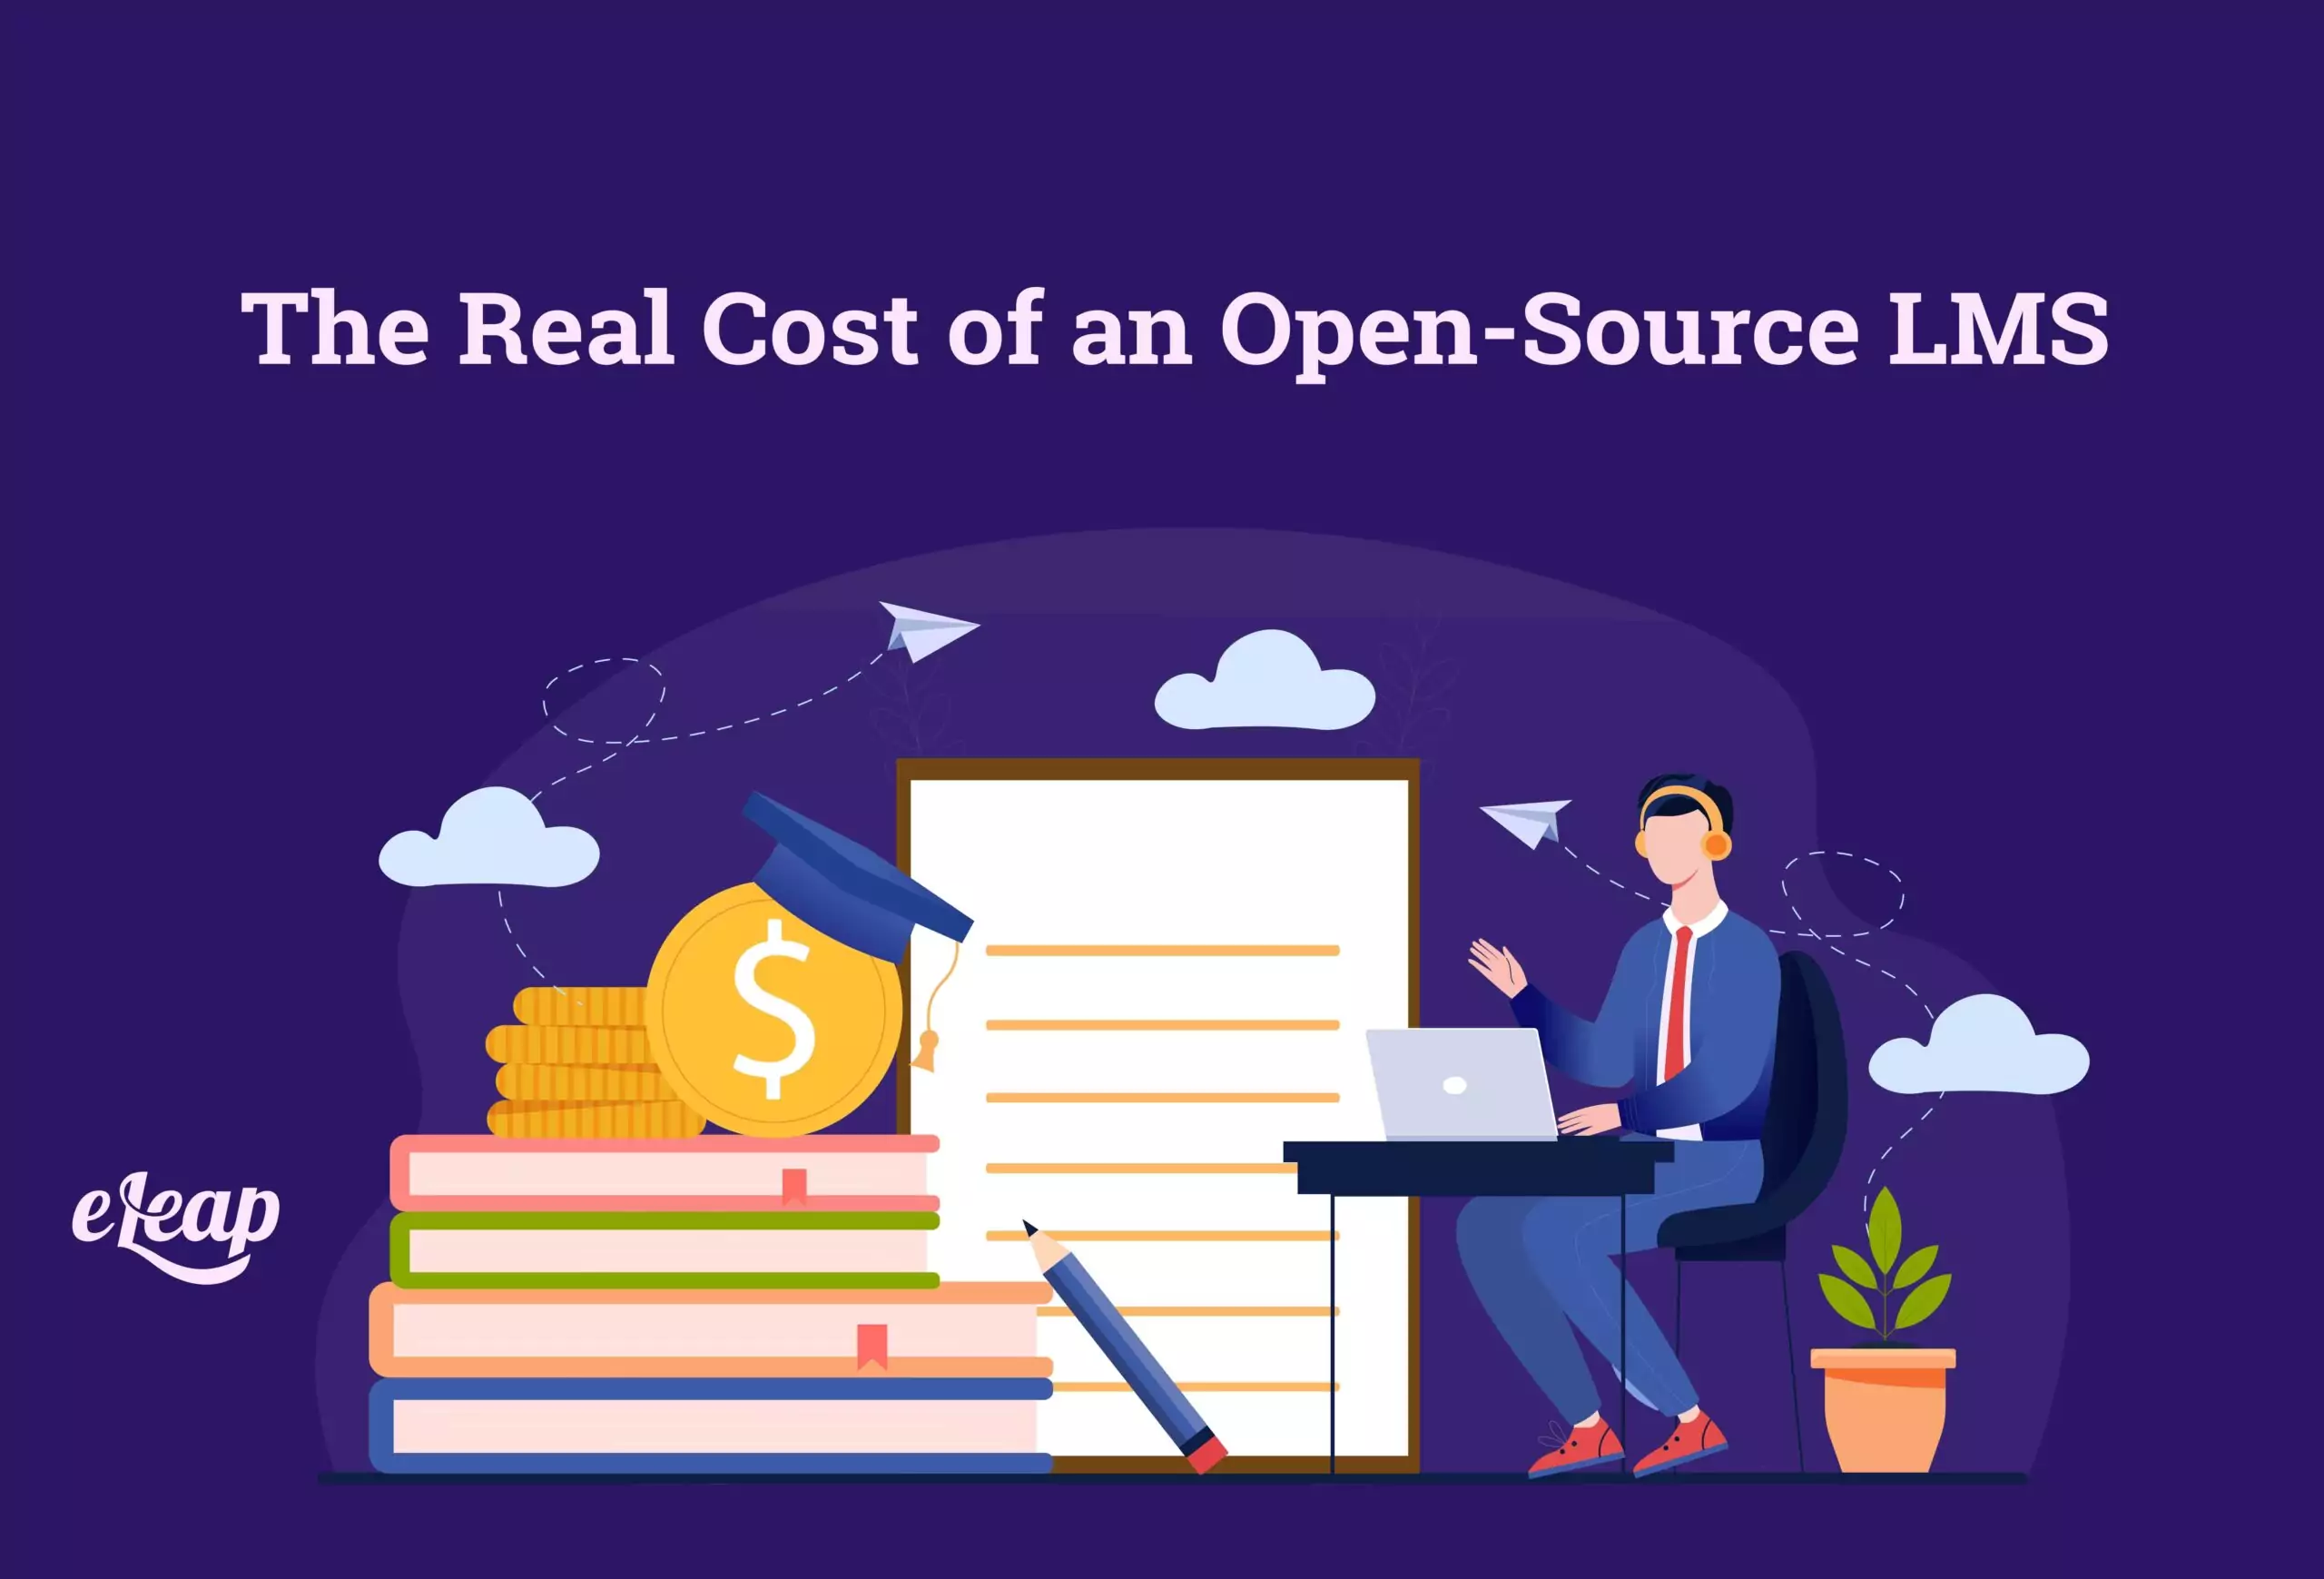 The Real Cost of an Open-Source LMS